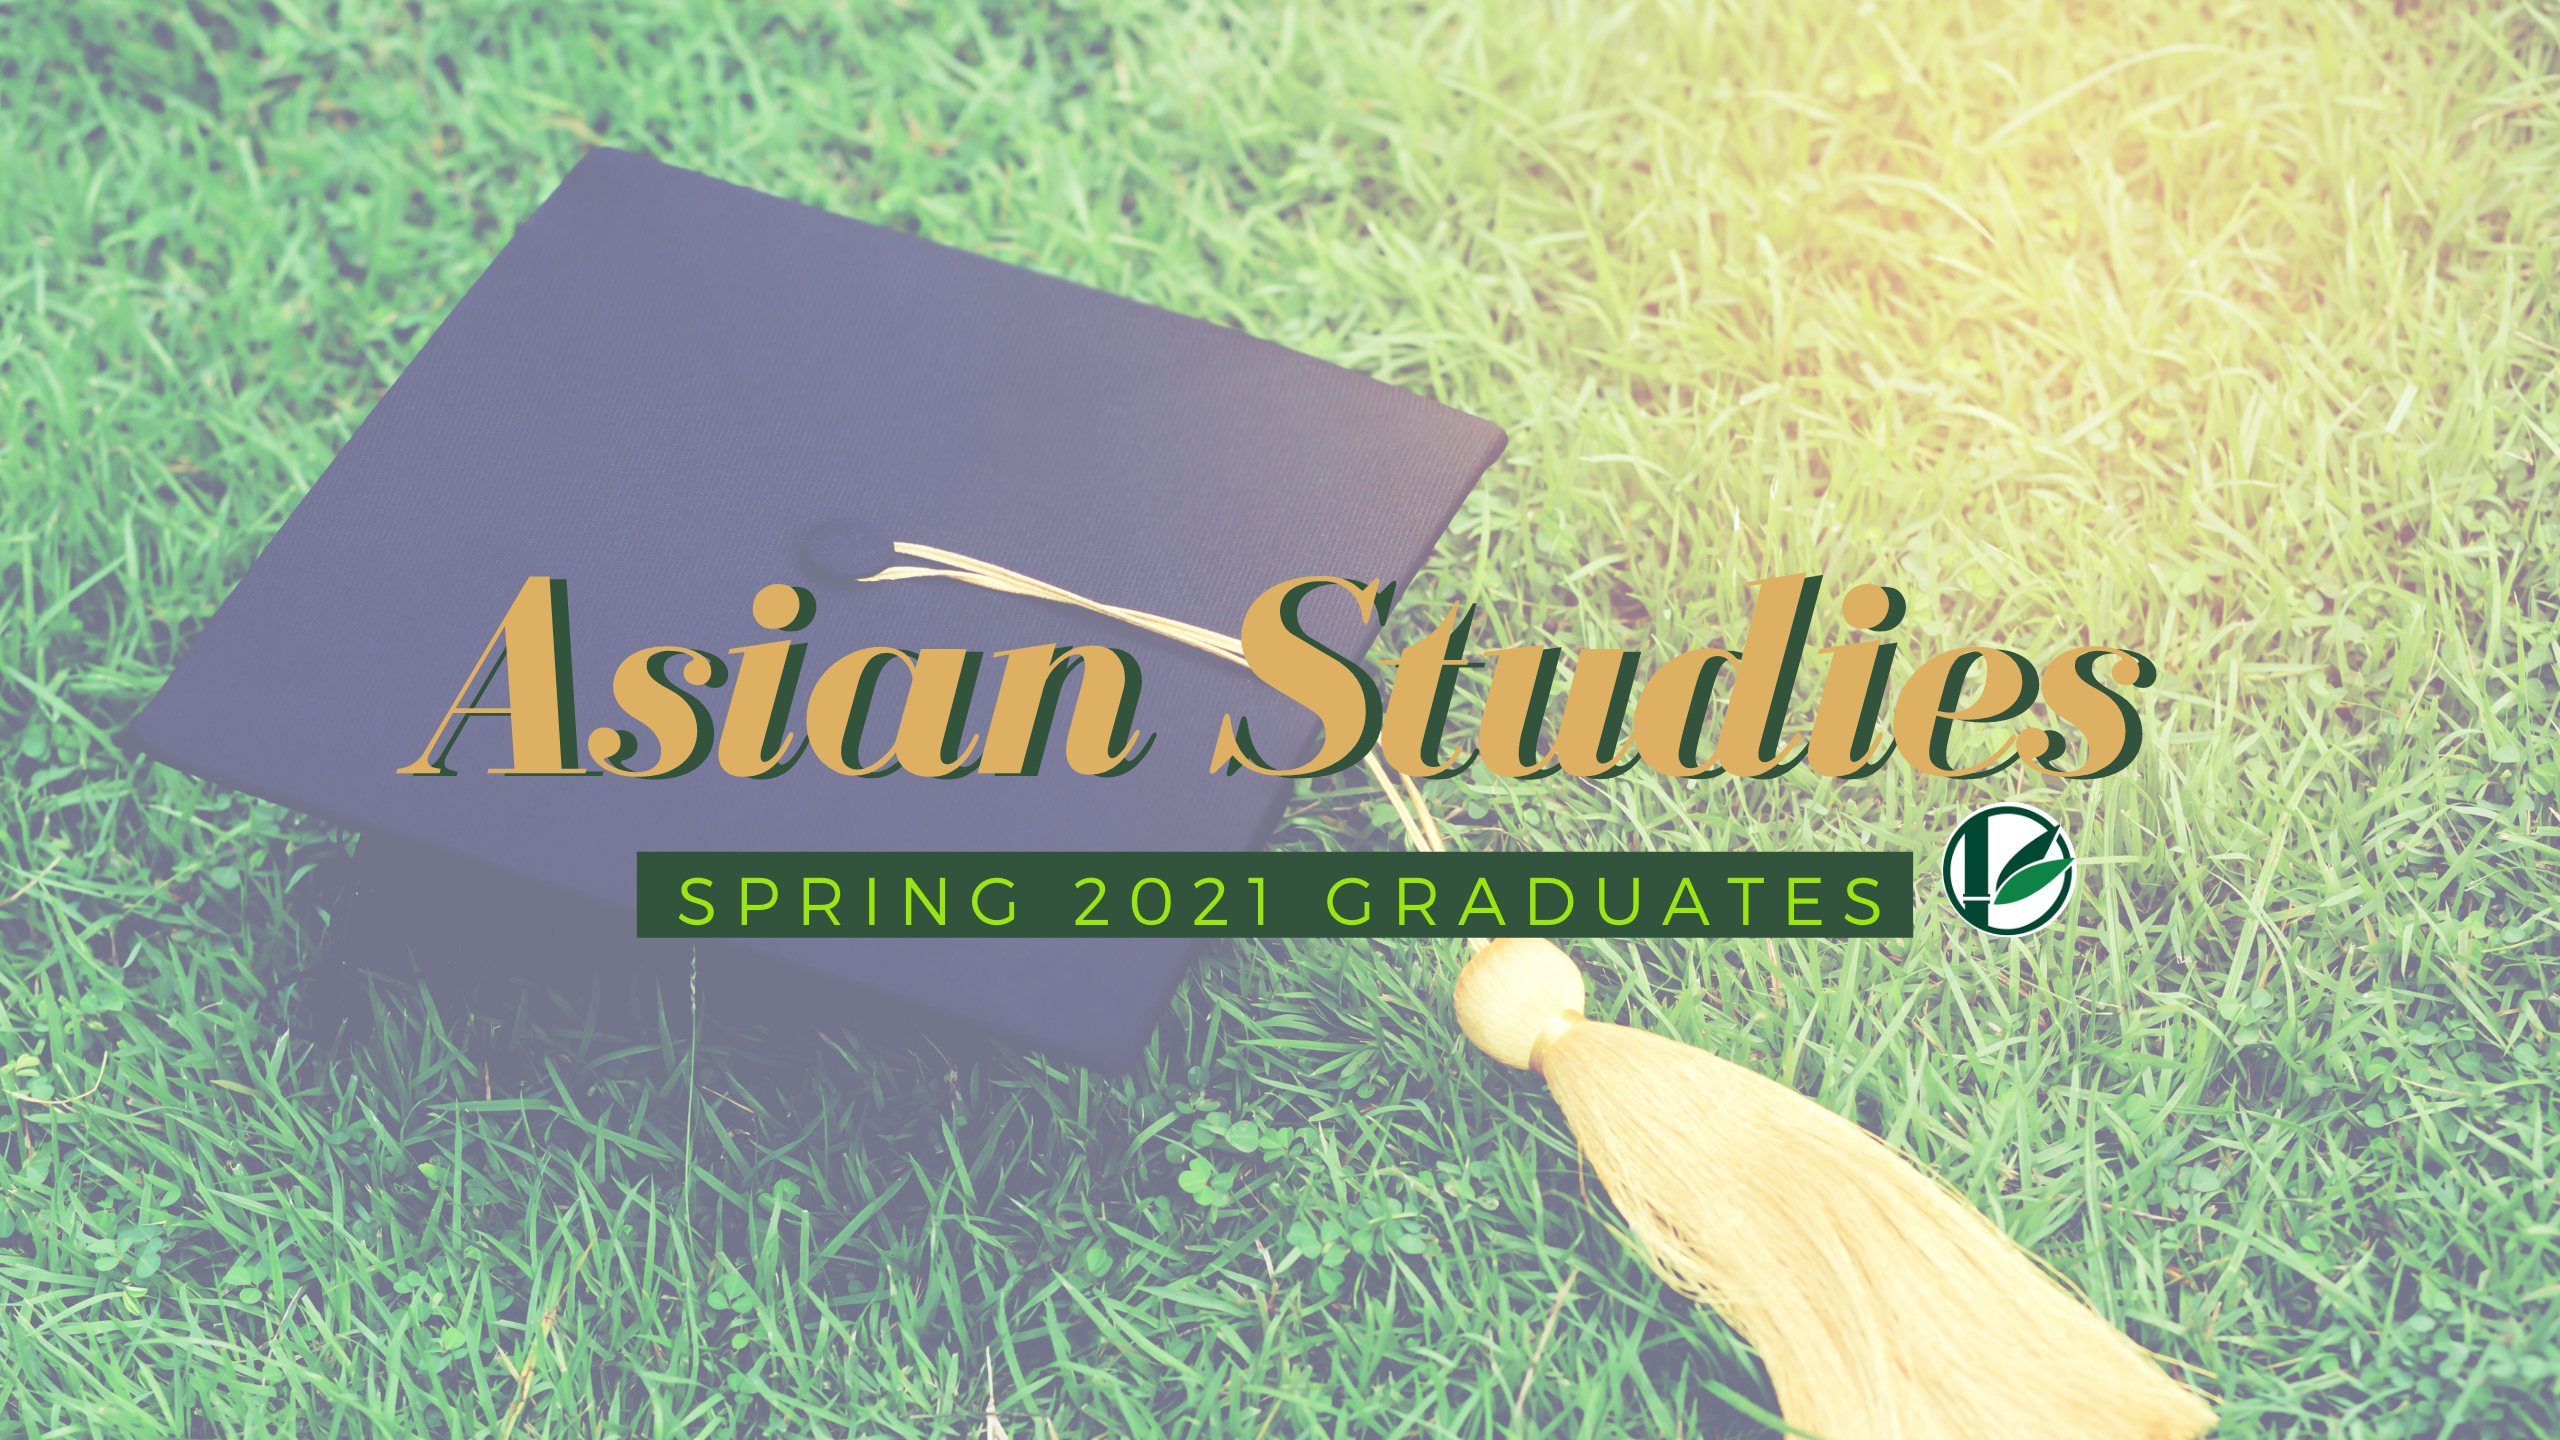 Background has green grass with a black graduation cap and yellow tassel. Middle reads in yellow text "Asian Studies" with green rectangle underneath with words "Spring 2021 Graduates" in light green and all capital letters. Next to green rectangle has the Asian Studies logo, a white circle containing a green bamboo illustration,